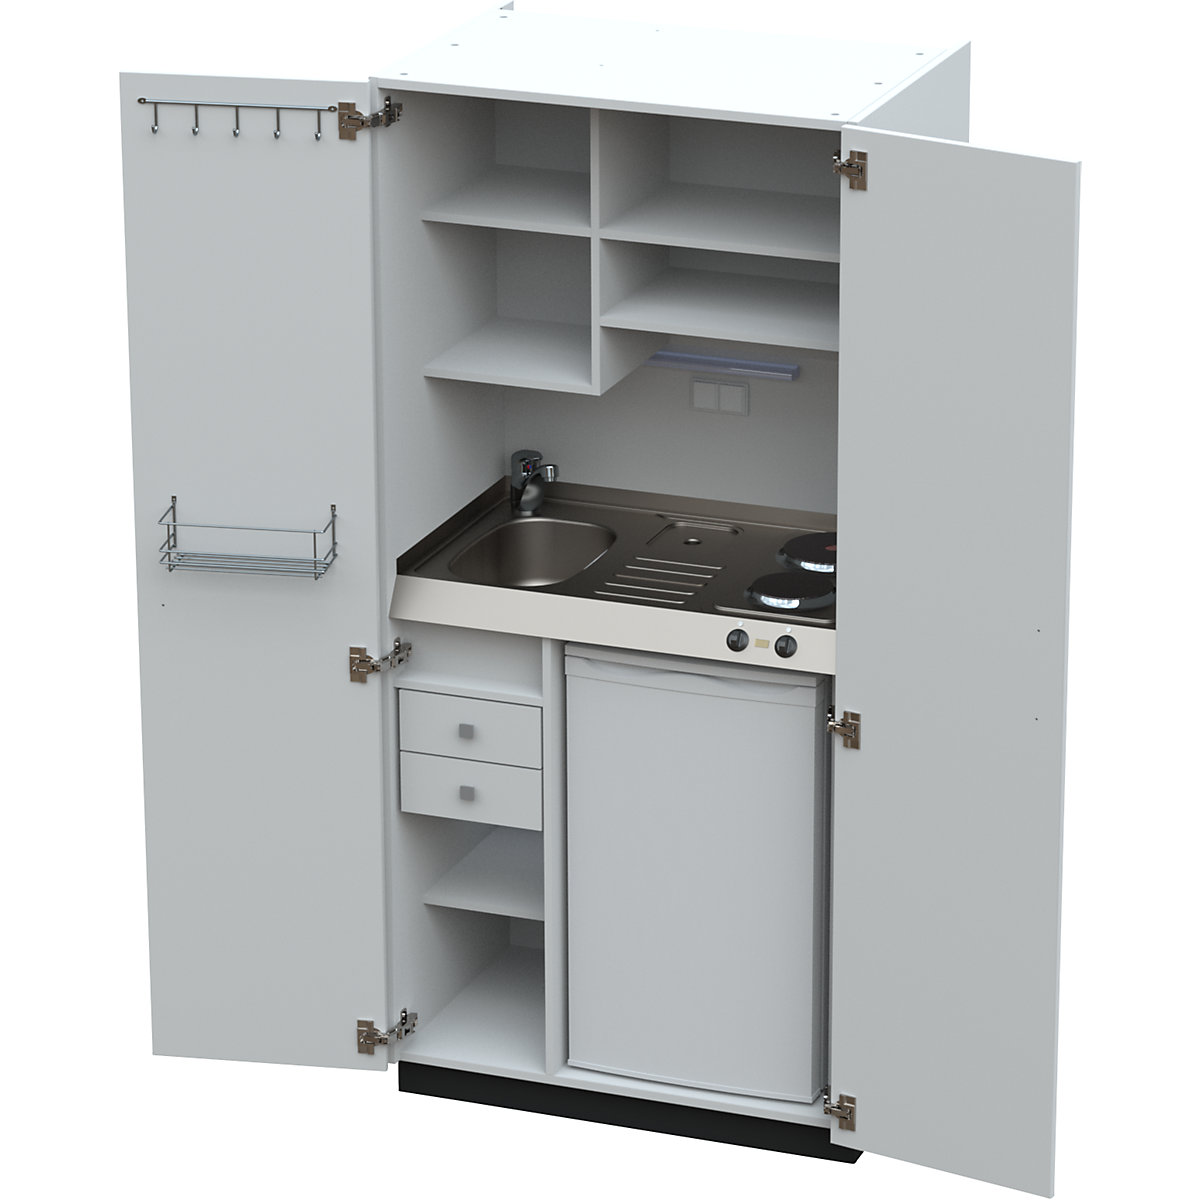 What is a kitchenette unit?